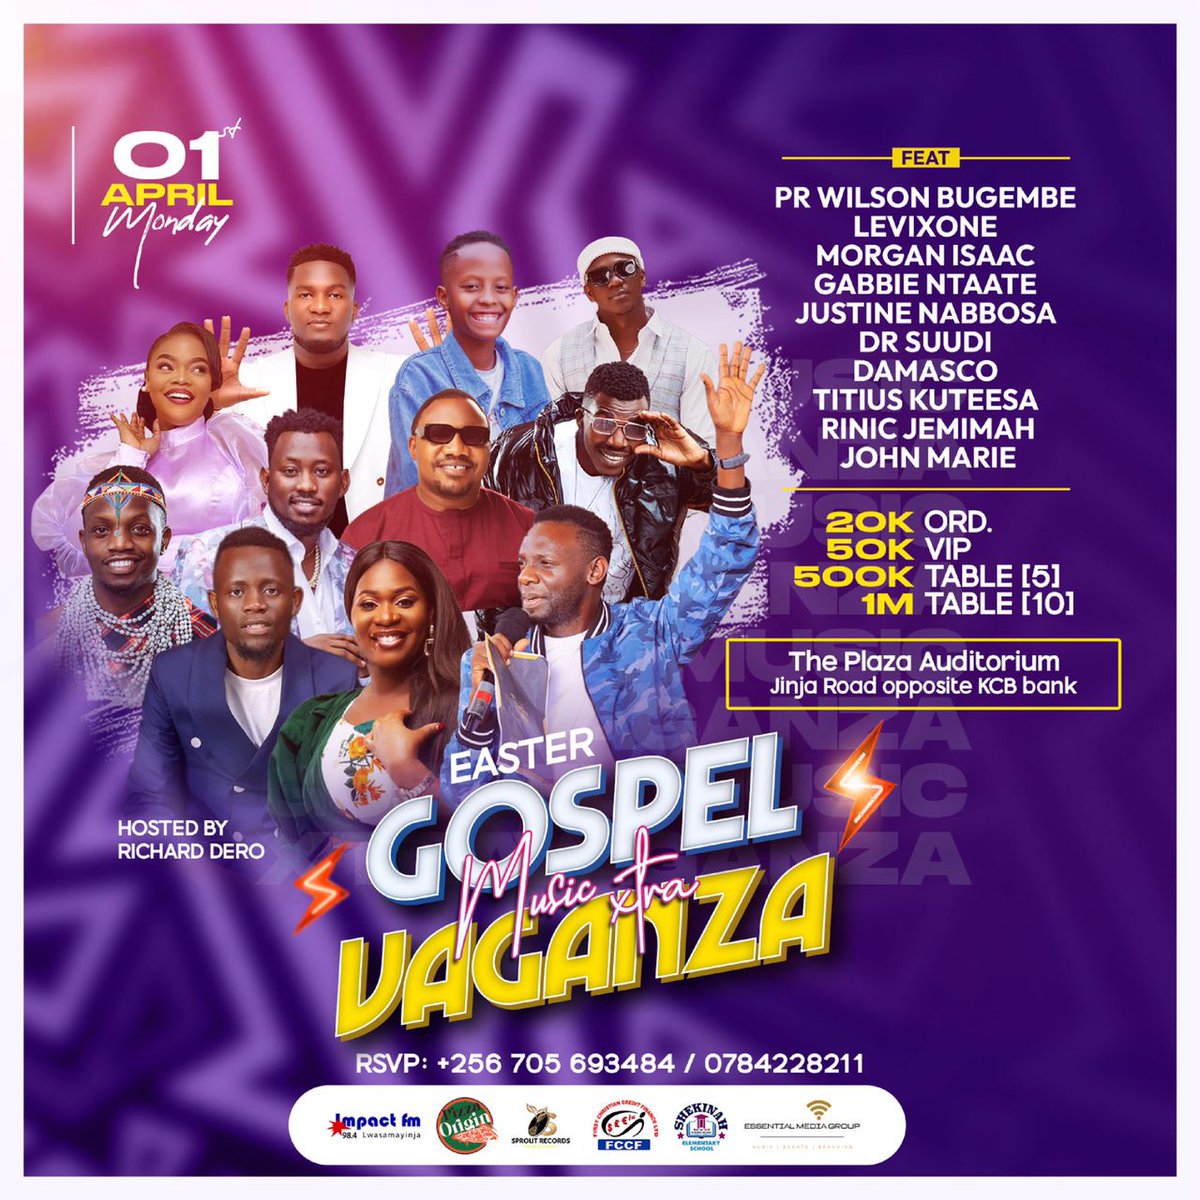 Easter Monday is a day we be chilling at home with no options of where to go. So I here would like to invite you all for this amazing event call it a 'Family Get Away Event.' Come let's celebrate Jesus #EasterGospelMusicXtravaganza